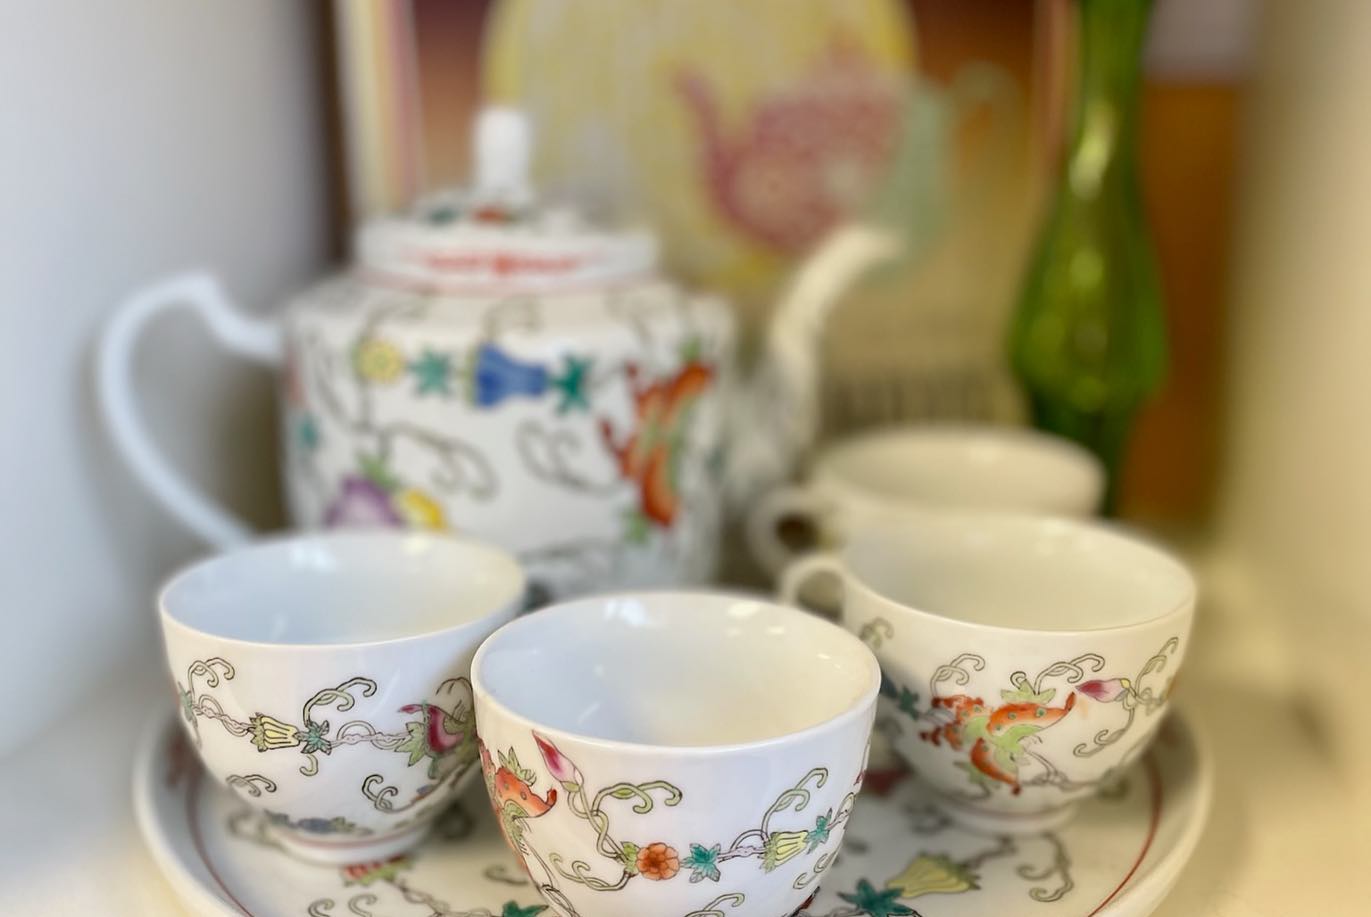 A tea set from Great Eastern Vintage